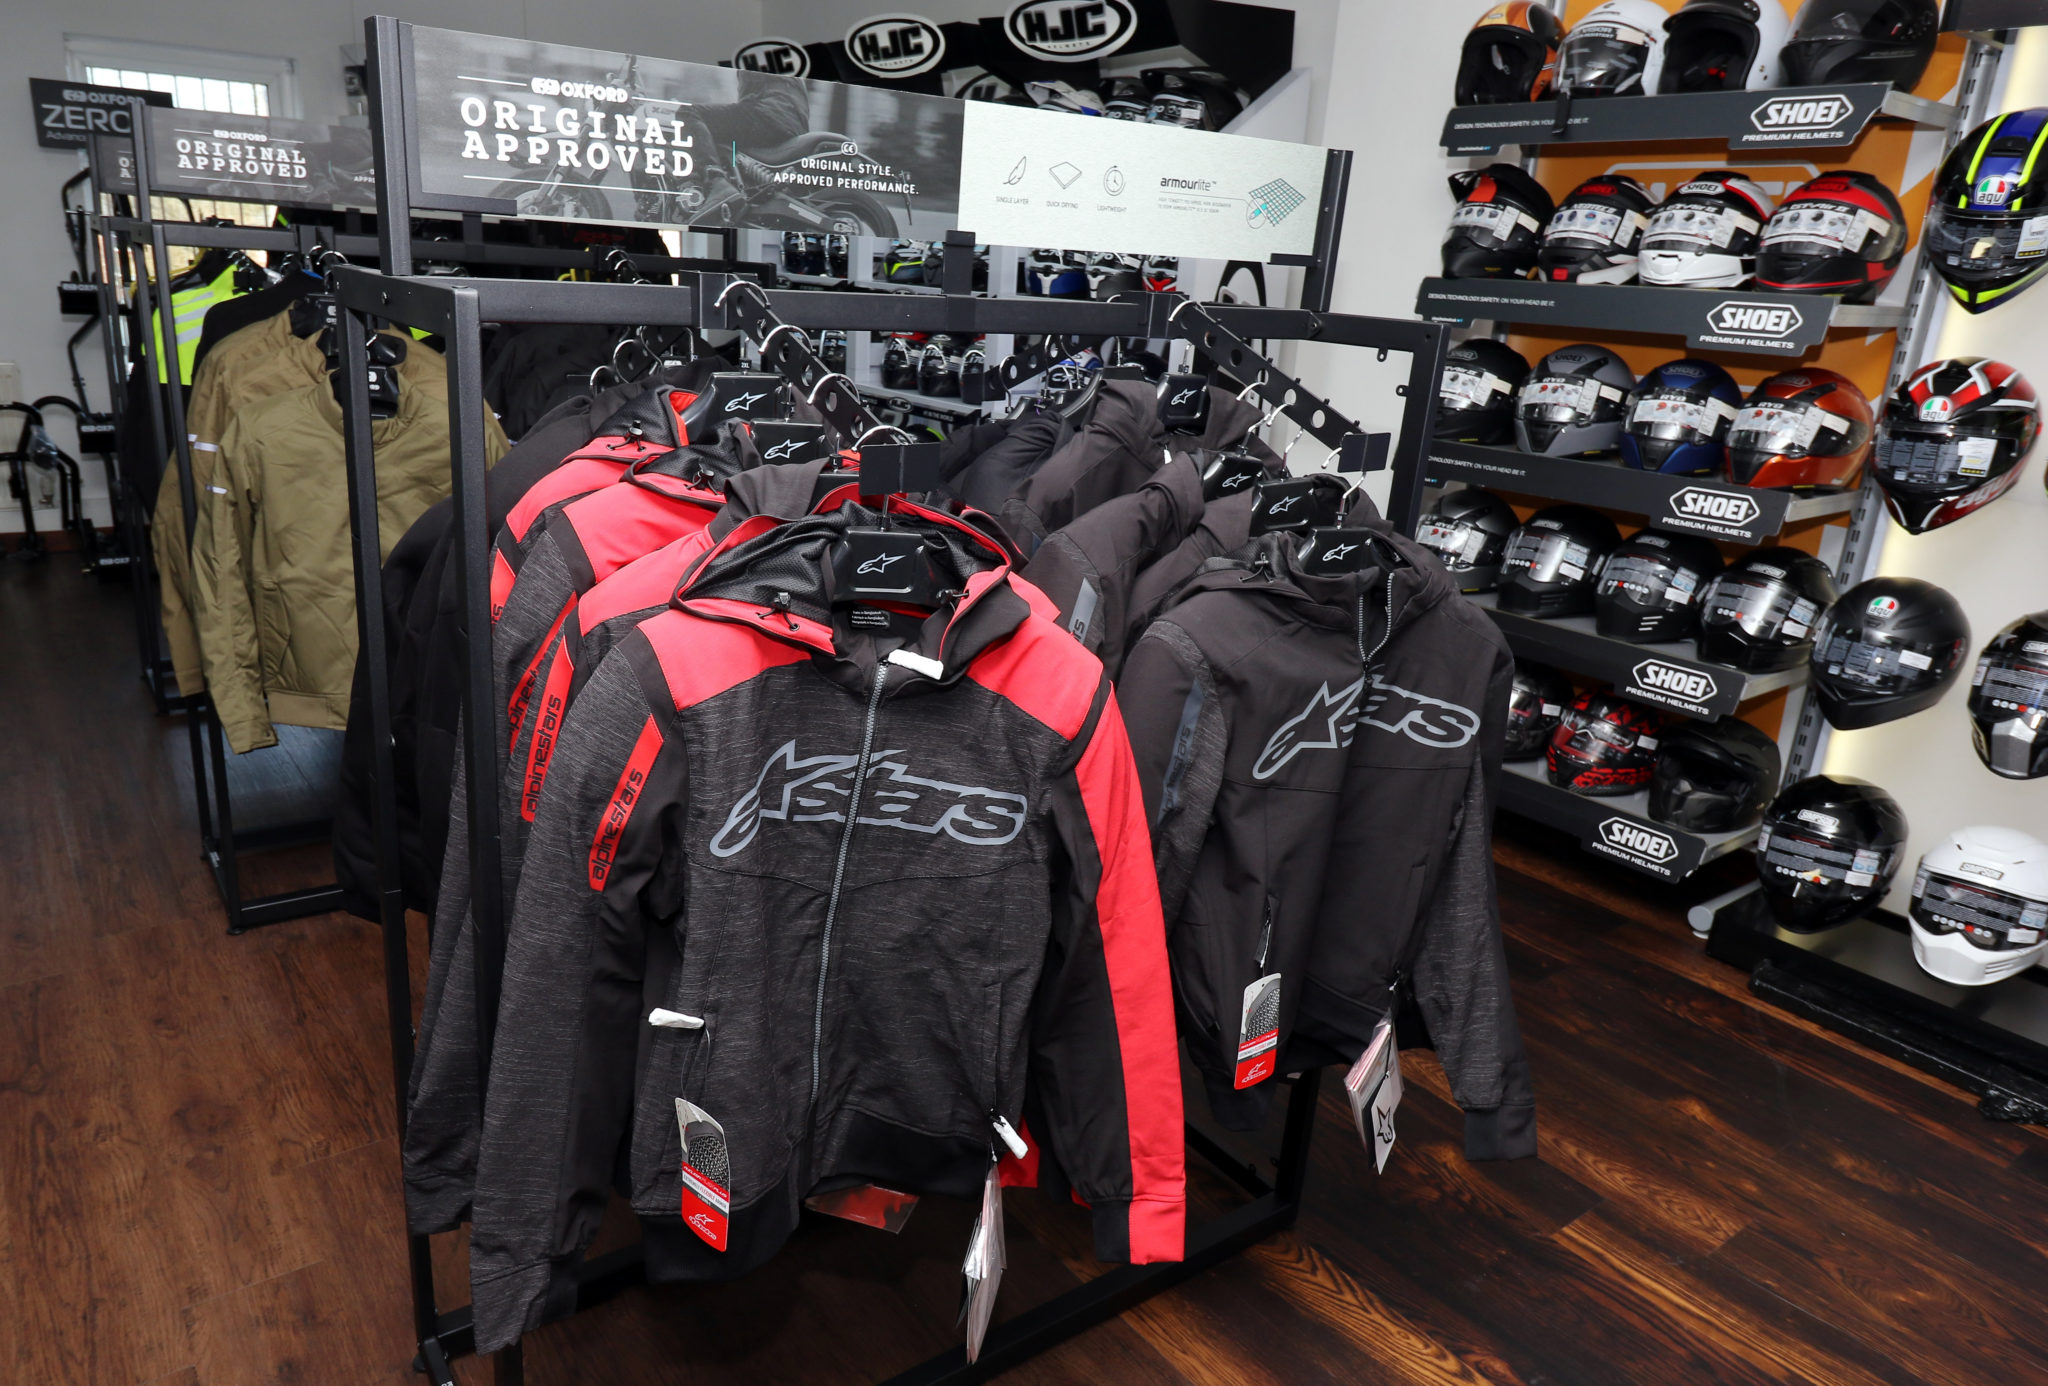 Motorcycle Accessories & Clothing - Hunts Motorcycles - New Yamaha and ...